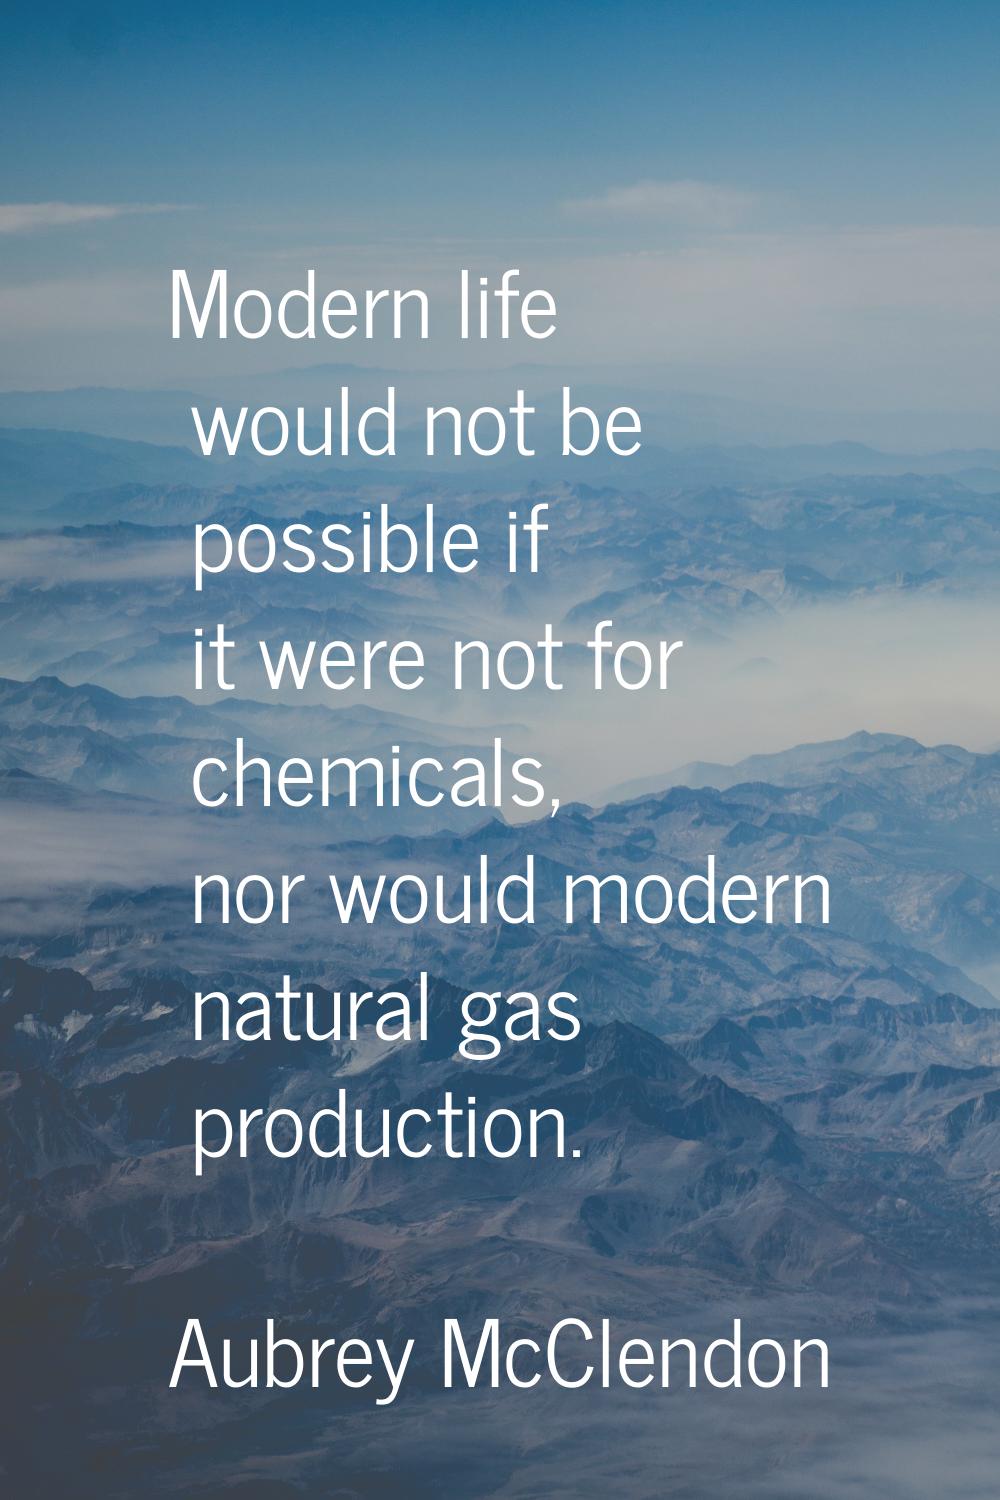 Modern life would not be possible if it were not for chemicals, nor would modern natural gas produc